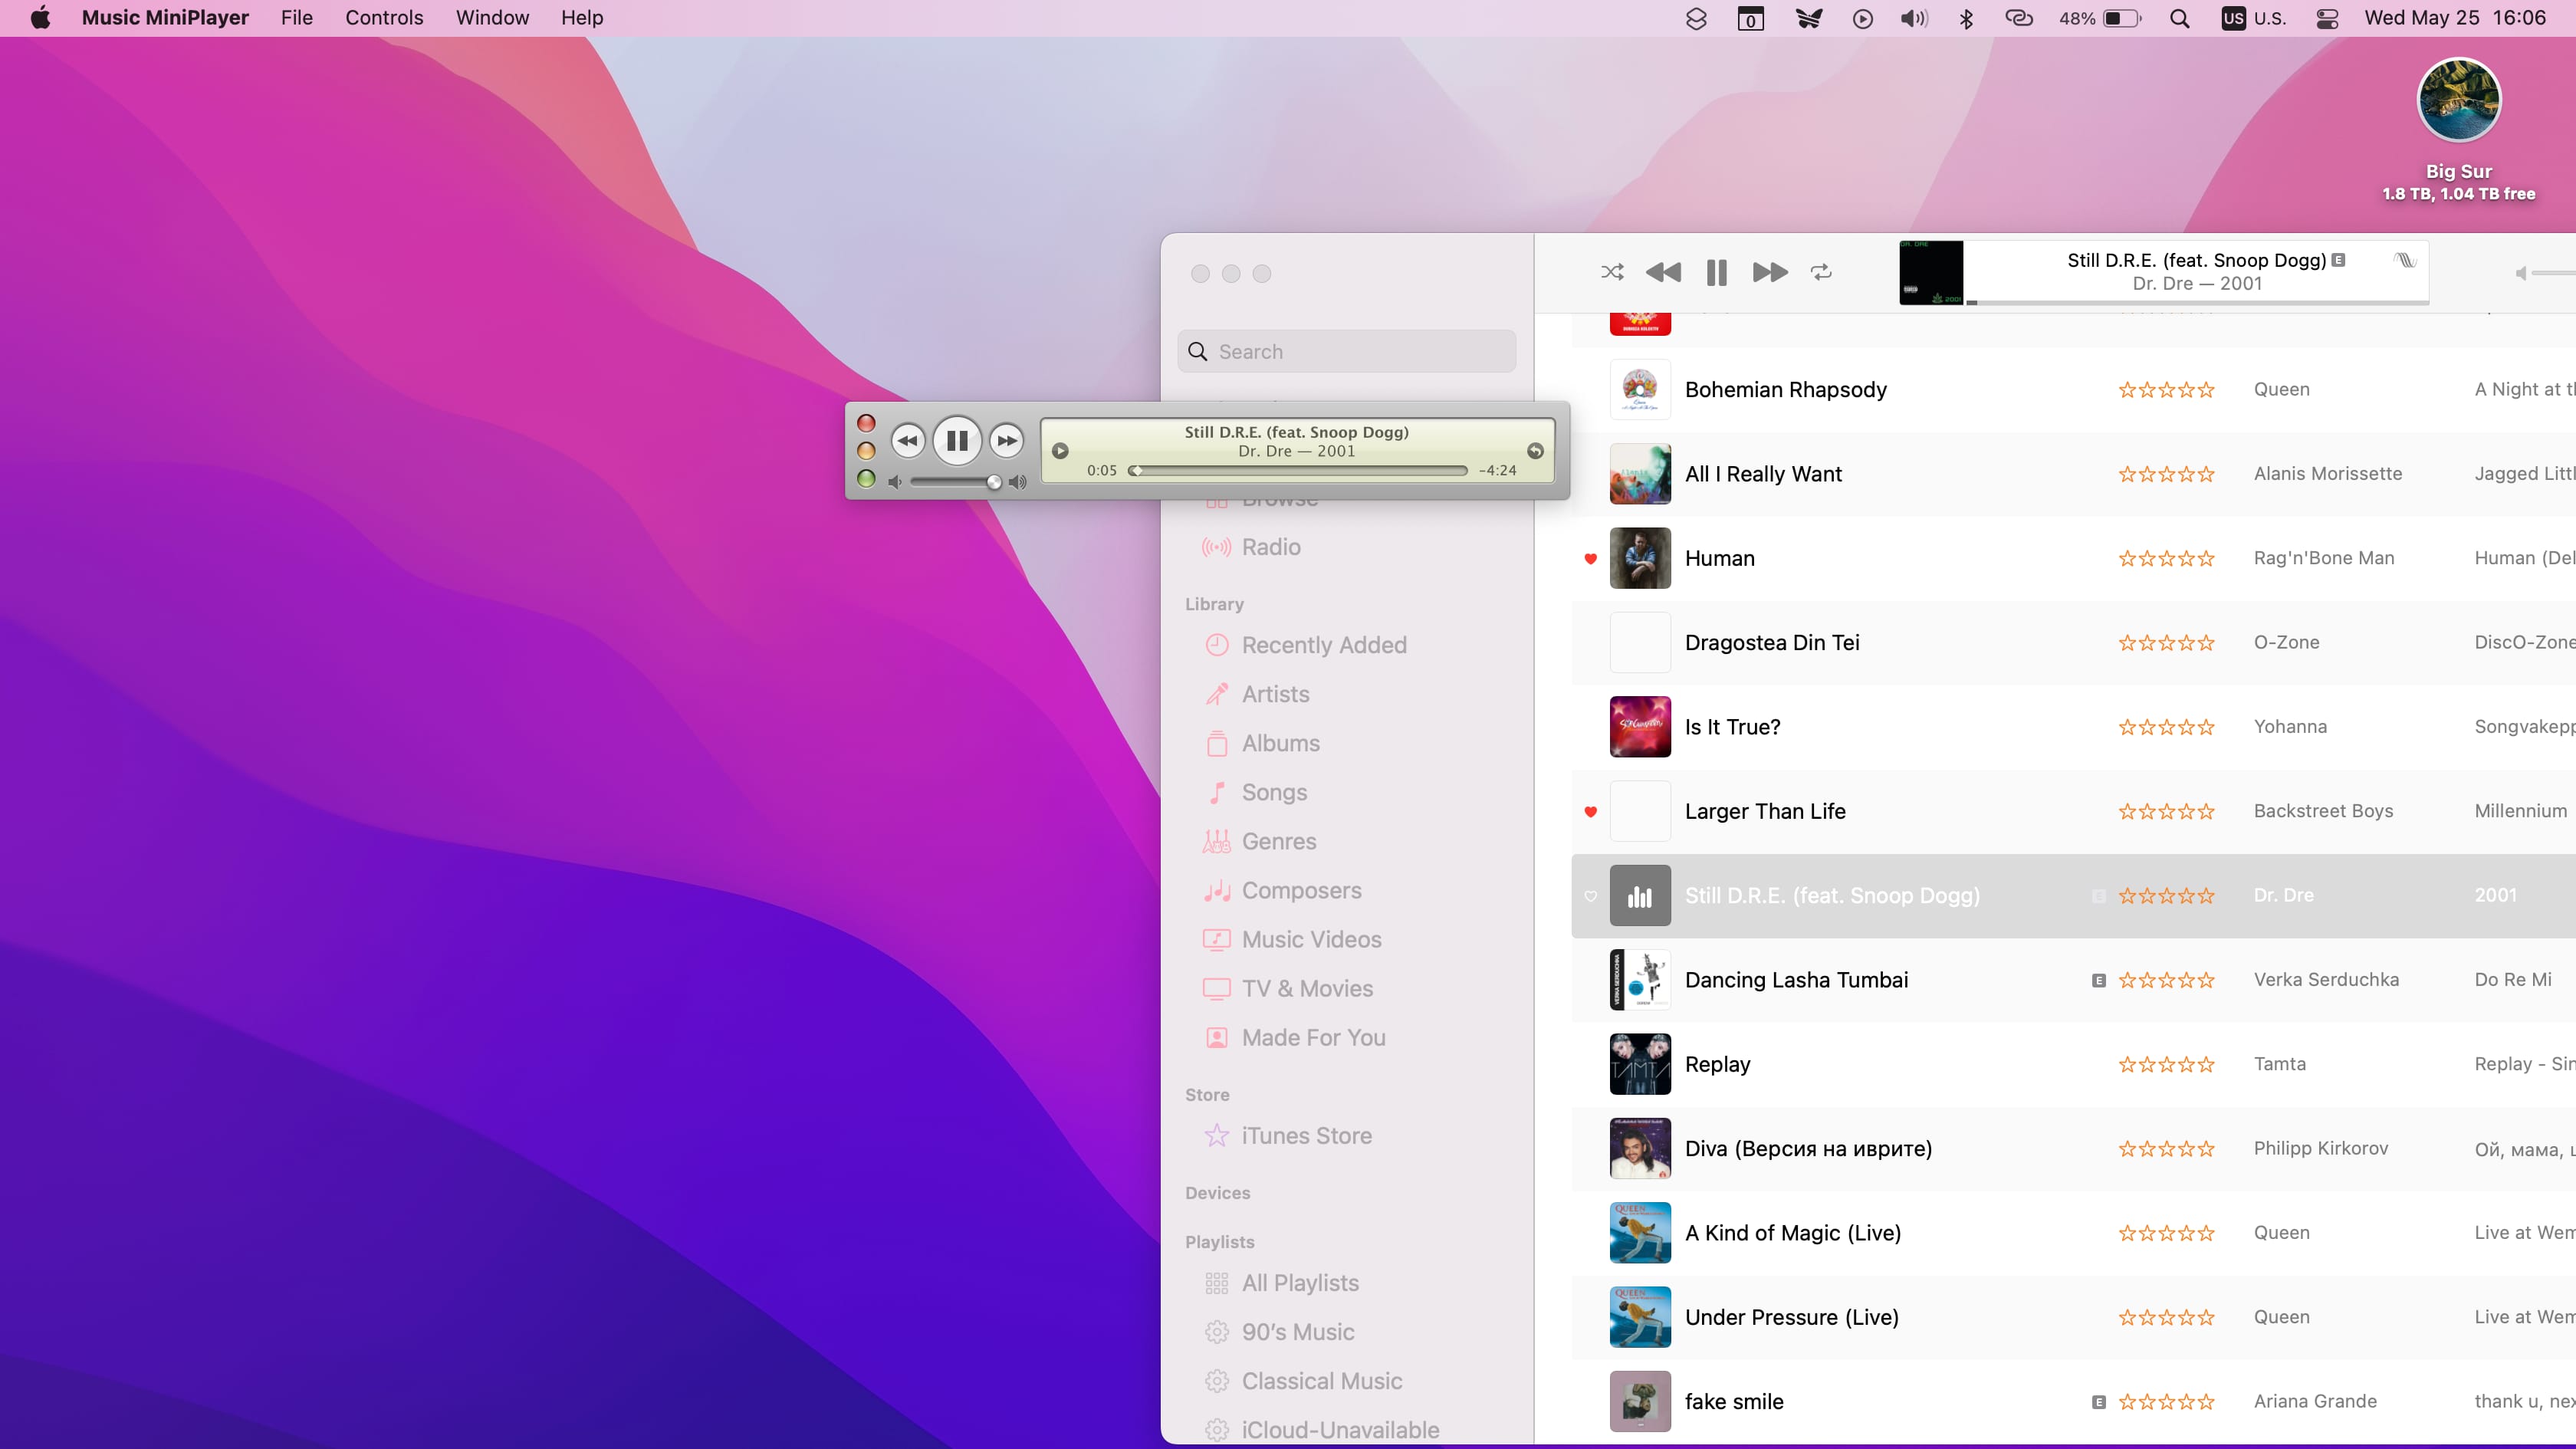 The Music MiniPlayer app by Mario Guzman is showcased in this screenshot. Use this app to control Apple Music on any modern macOS version with a pixel-perfect replica of the iTunes minimalist mini-player.